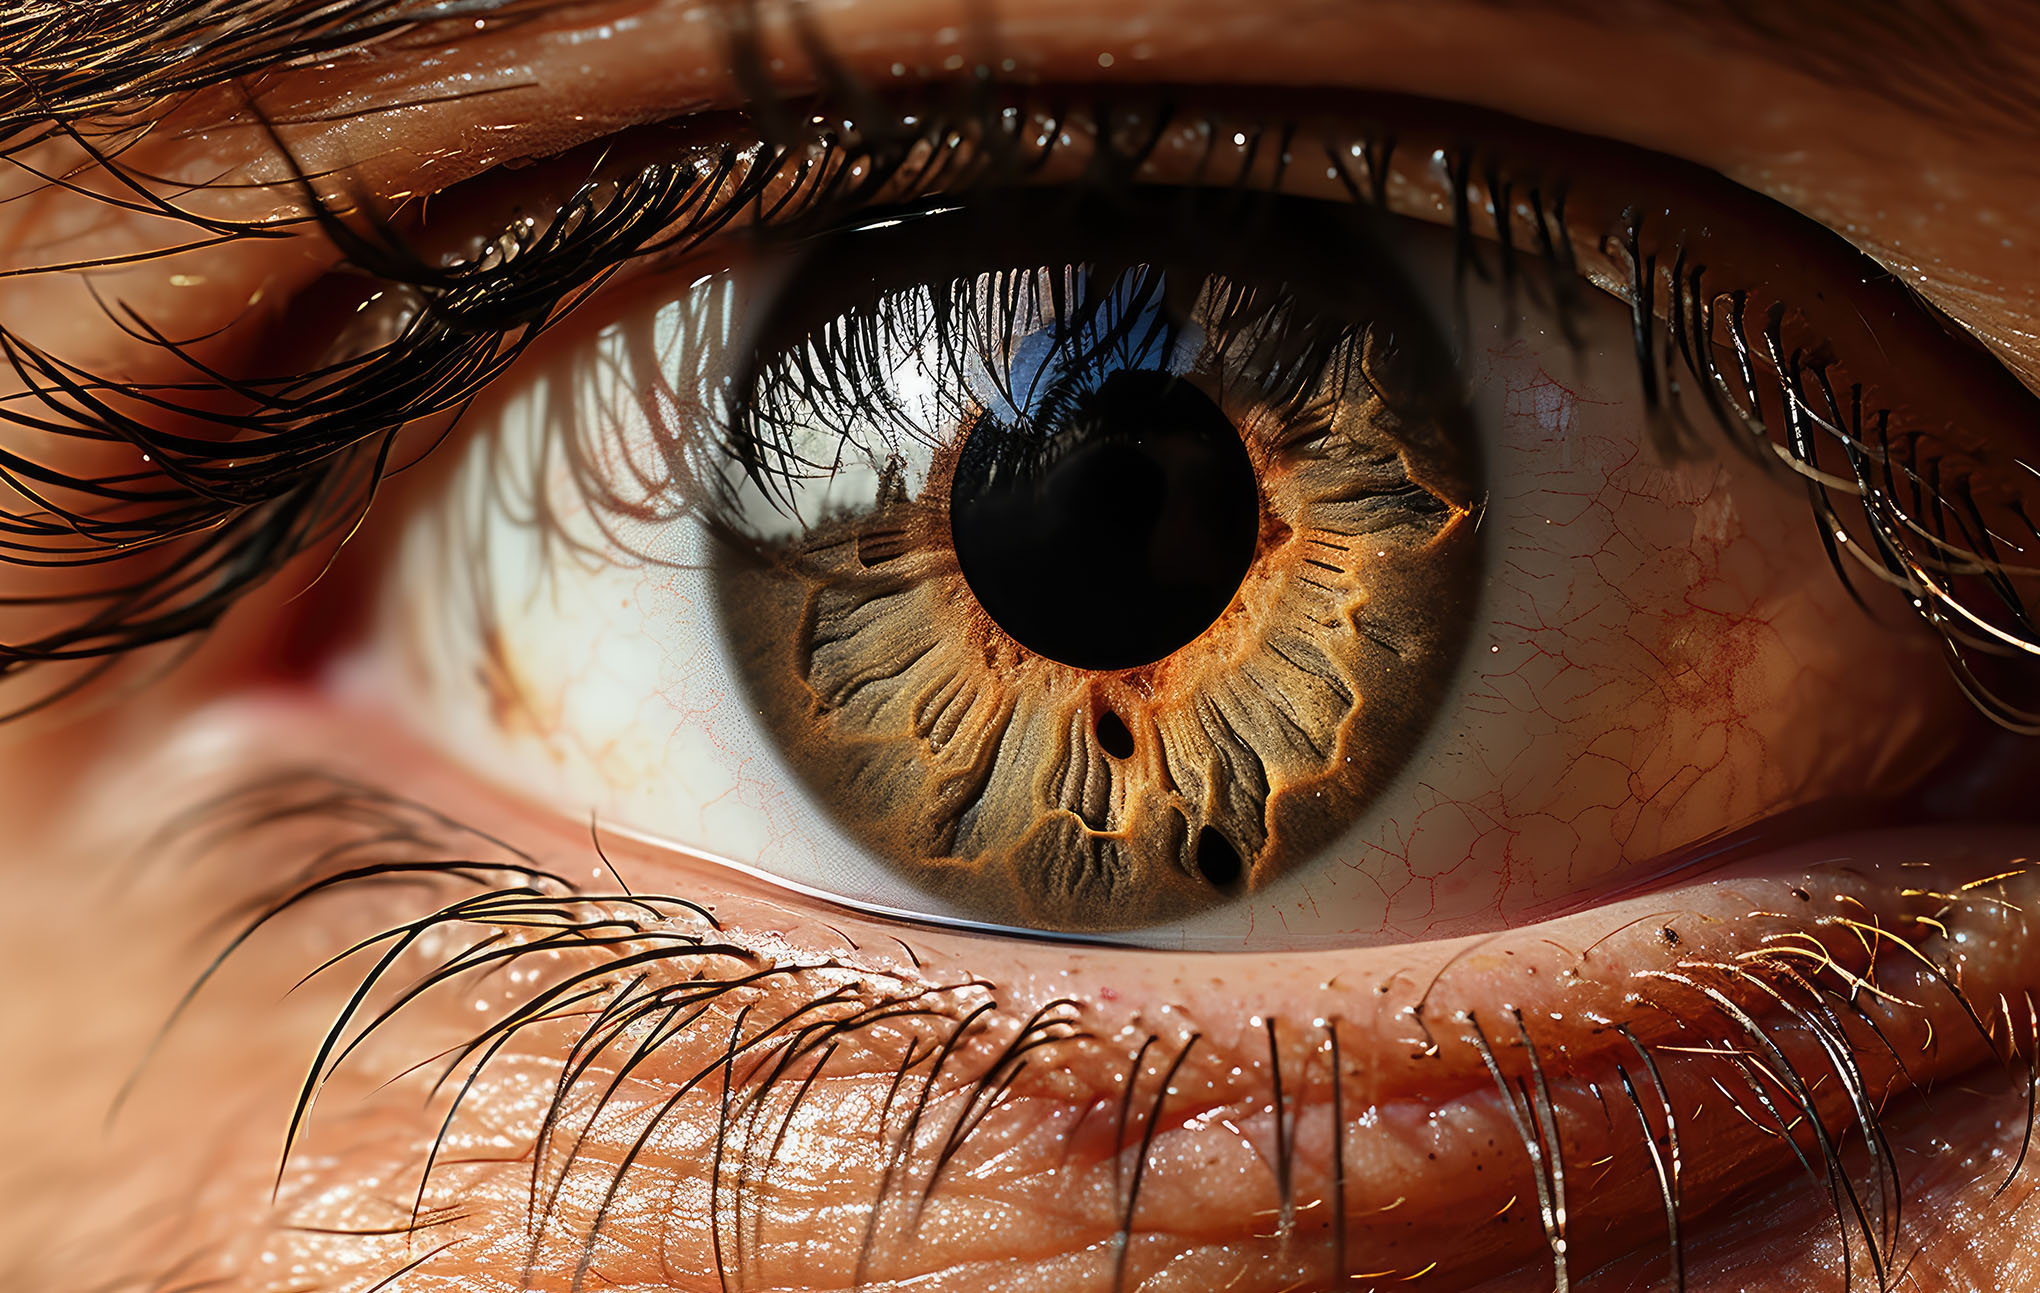 A highly detailed close-up of a human eye, highlighting the intricate patterns of the iris, visible blood vessels in the sclera, and textured eyelashes. the pupil is dilated, reflecting a vivid blue sky.